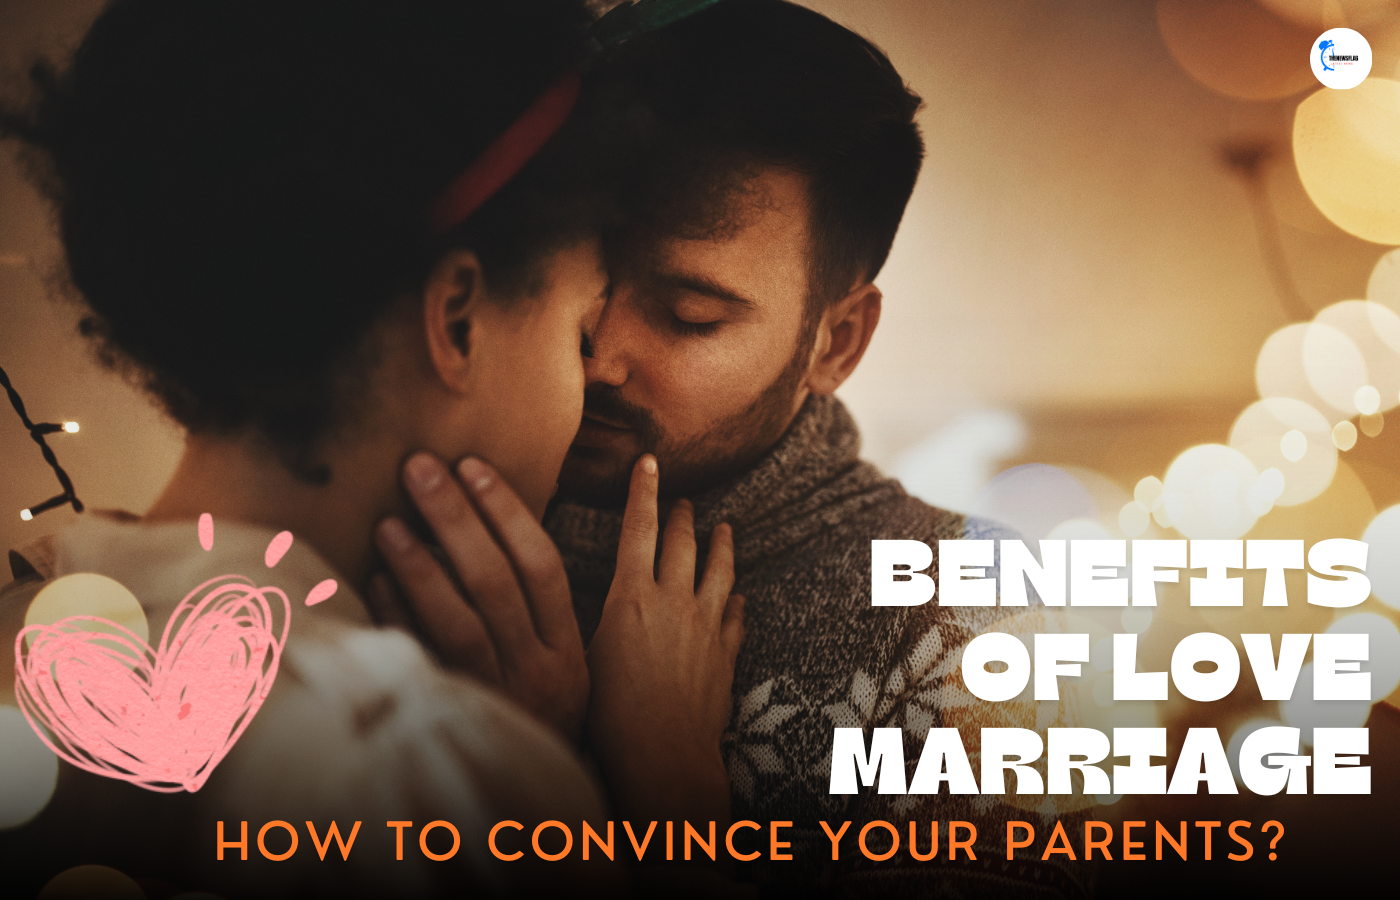 How do I convince my parents for my love?